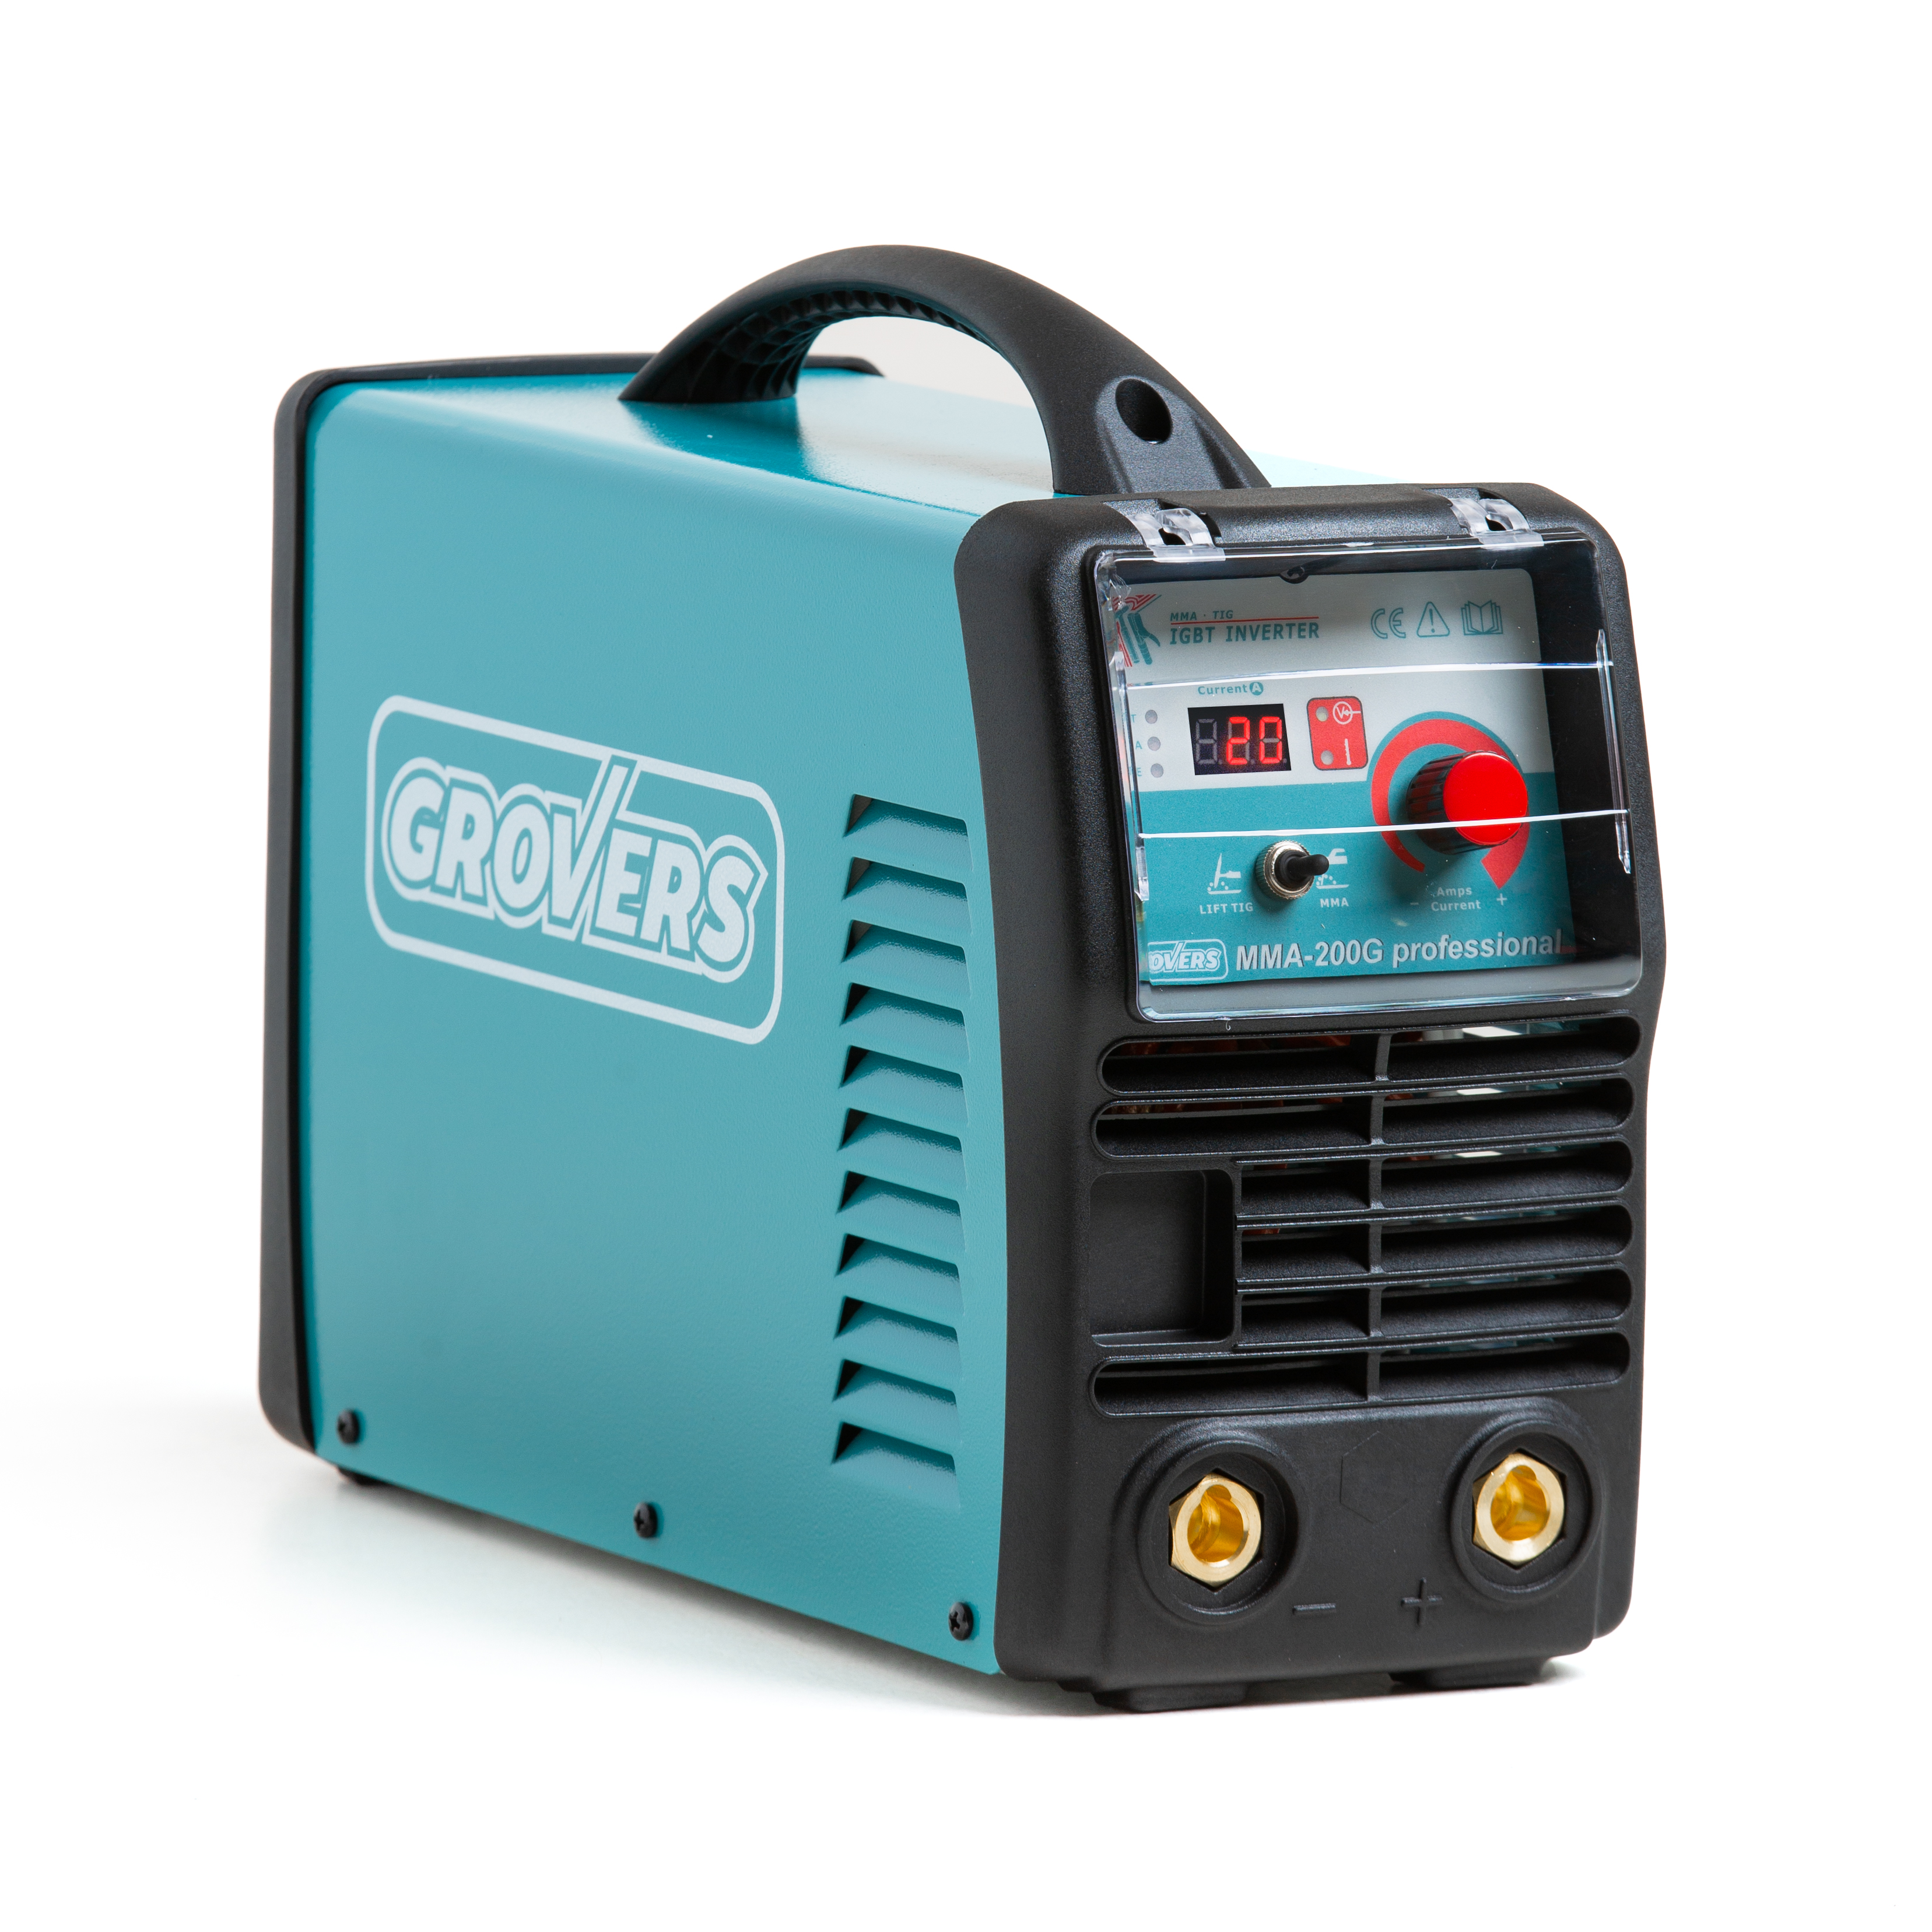 GROVERS MMA-200G professional